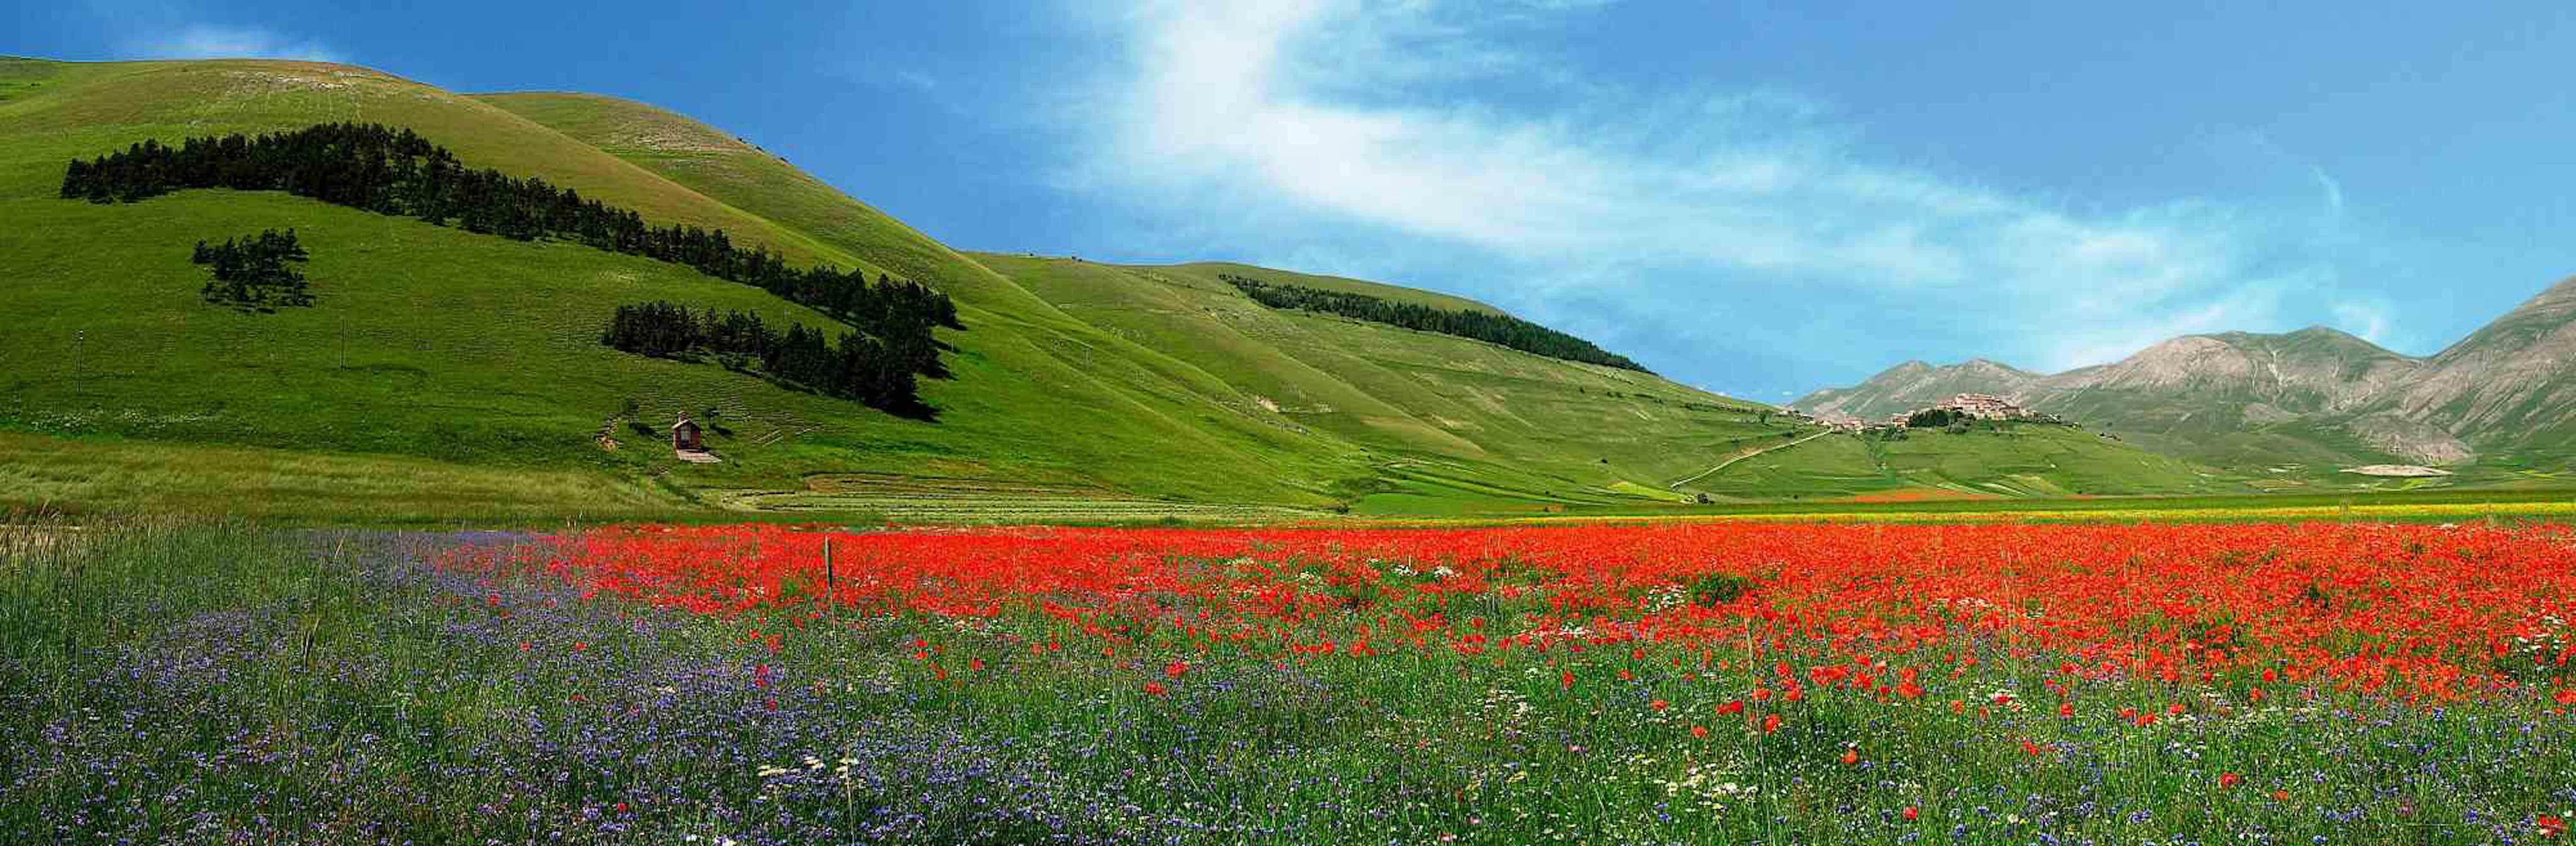 Dear Italy is one of the best photo on canvas realized by Giuseppe Marani in 2010.

Always passionate about landscapes and photography, the artist then devoted himself to landscaping. He greatly admires the beauty of the landscapes of Castelluccio